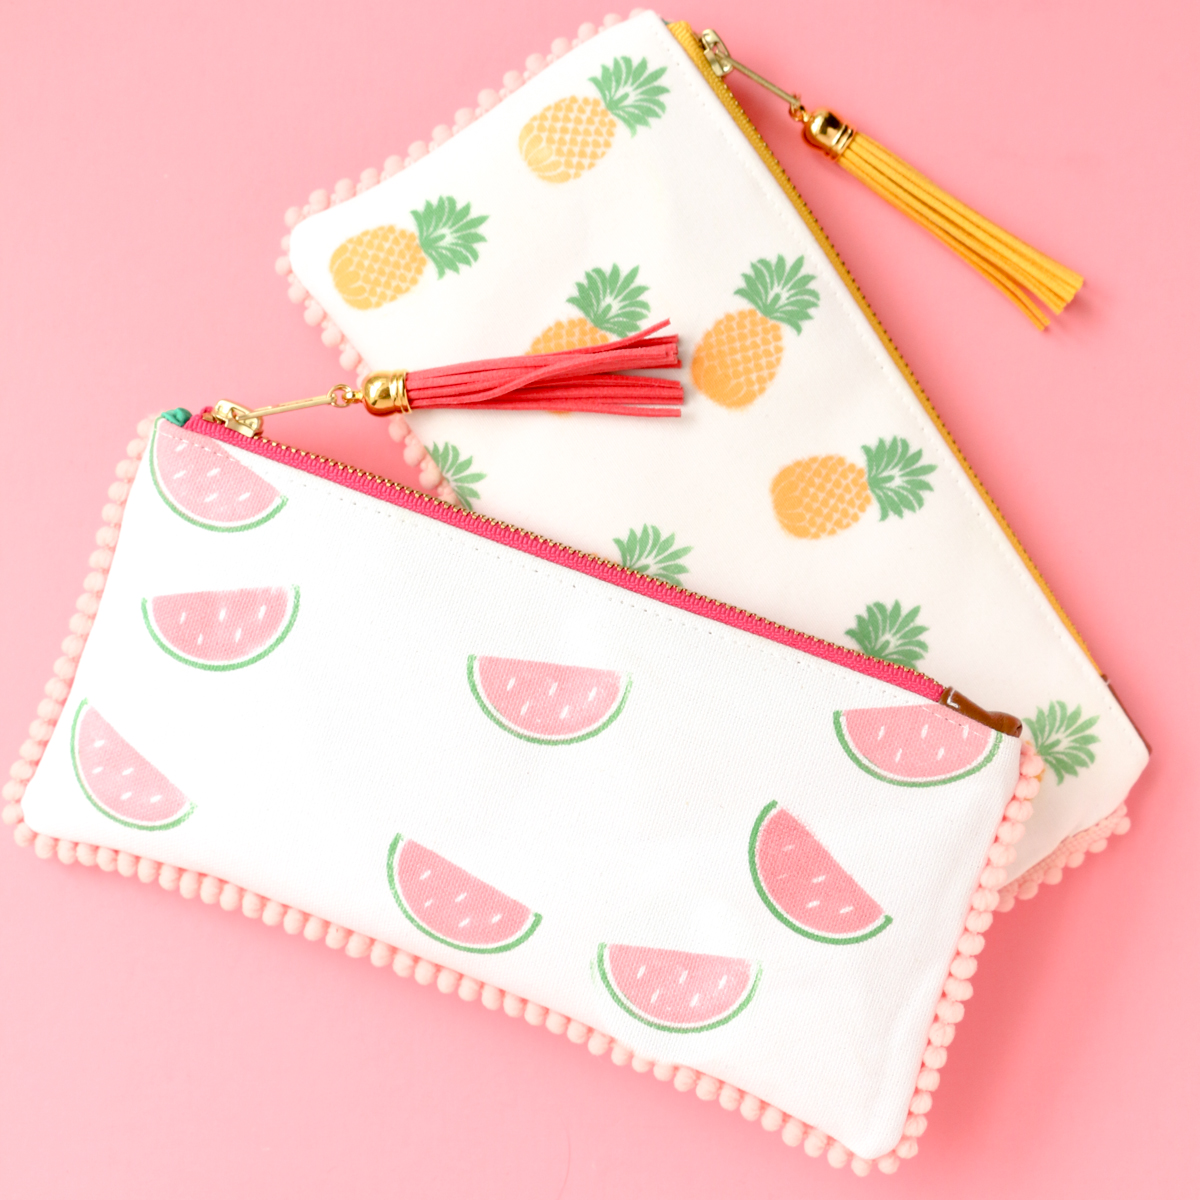 Make It - Fruity Snack Pouches - A Kailo Chic Life